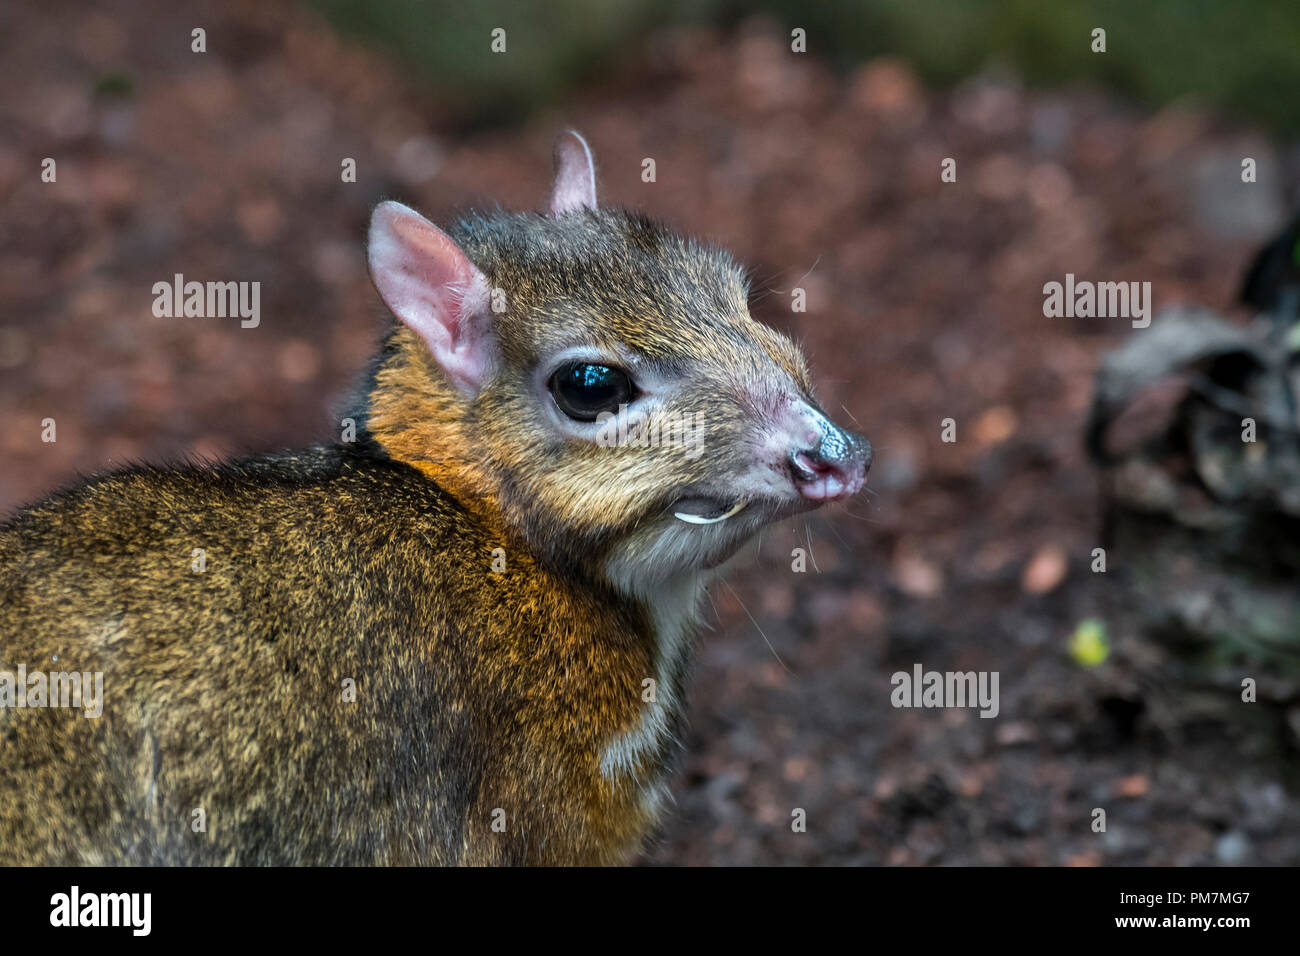 Lesser mouse-deer / kanchil / lesser Malay chevrotain (Tragulus kanchil) smallest hoofed mammal showing elongated canine teeth, Southeast Asia Stock Photo